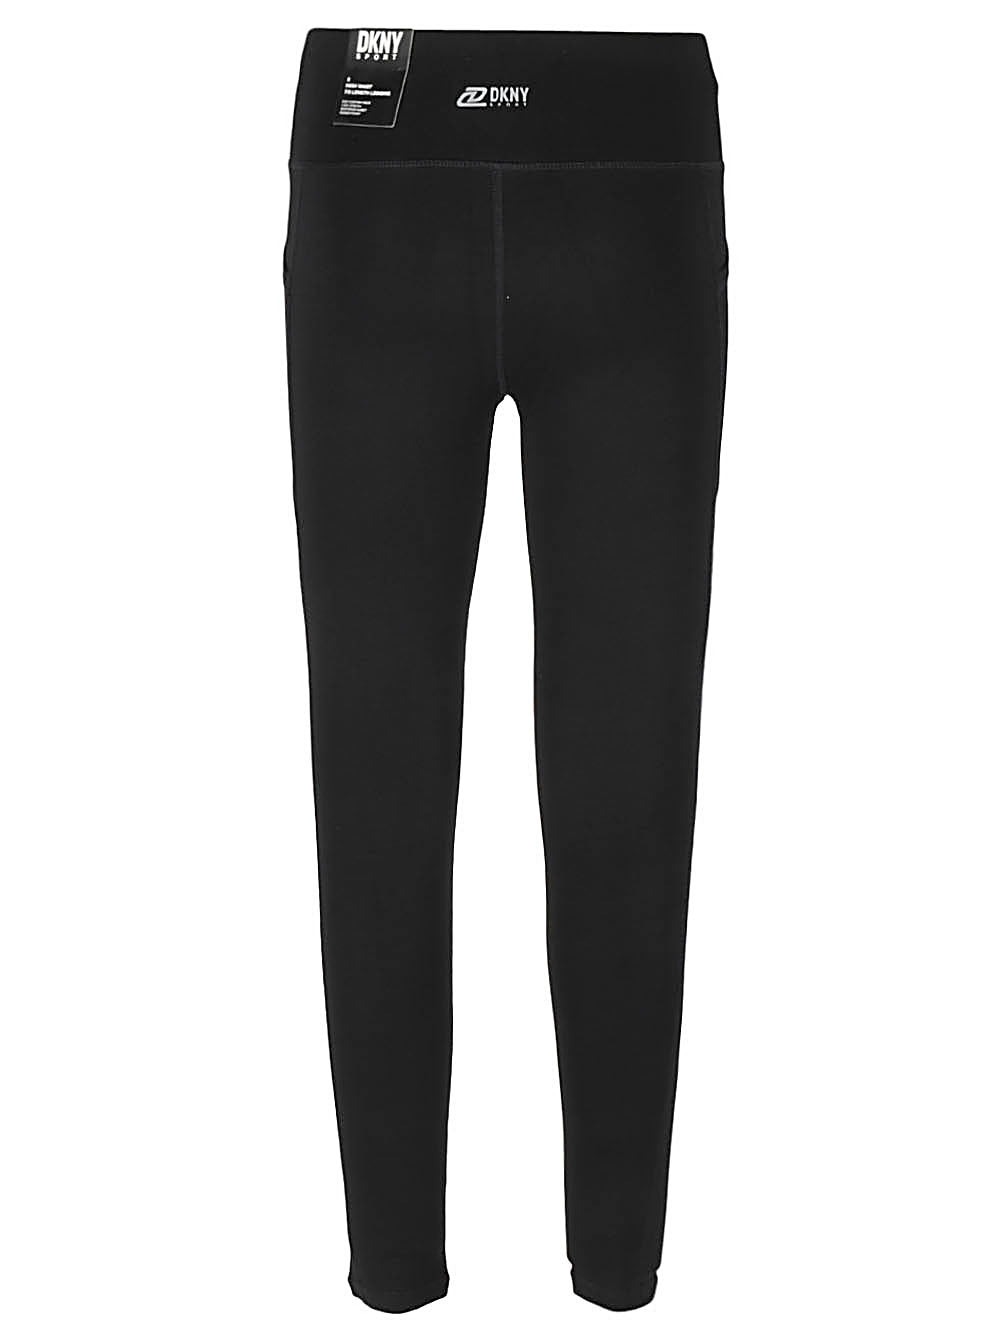 Dkny Active Pre Trousers Black